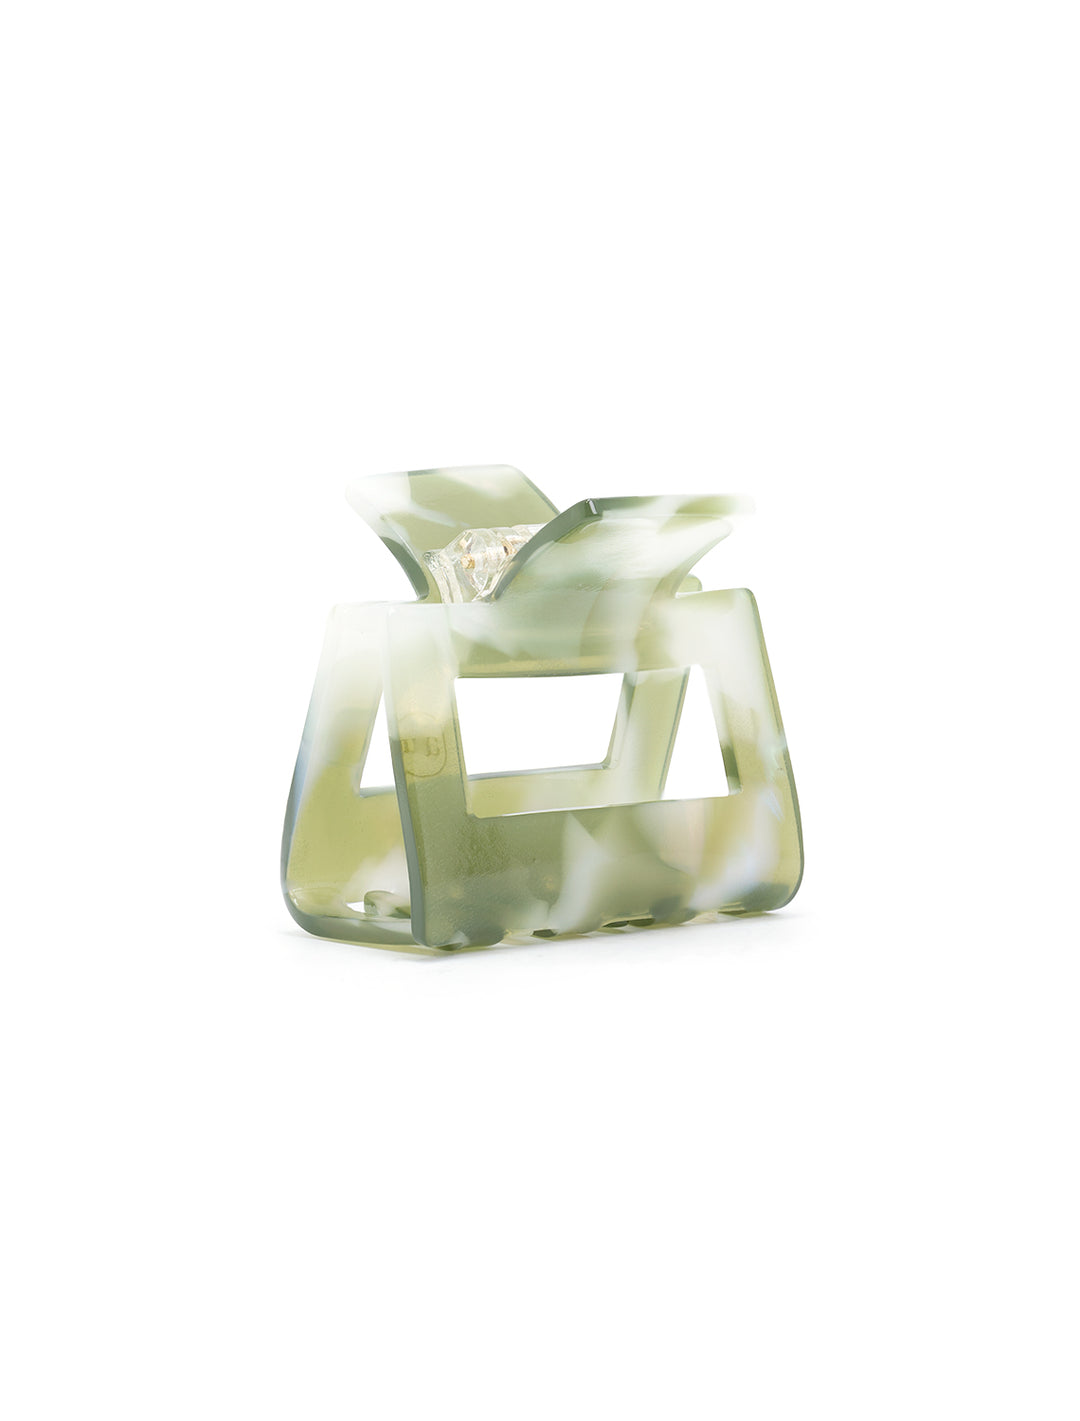 Front angle view of Tiepology's Eco Kylie Hair Clip in Olive Pearl.